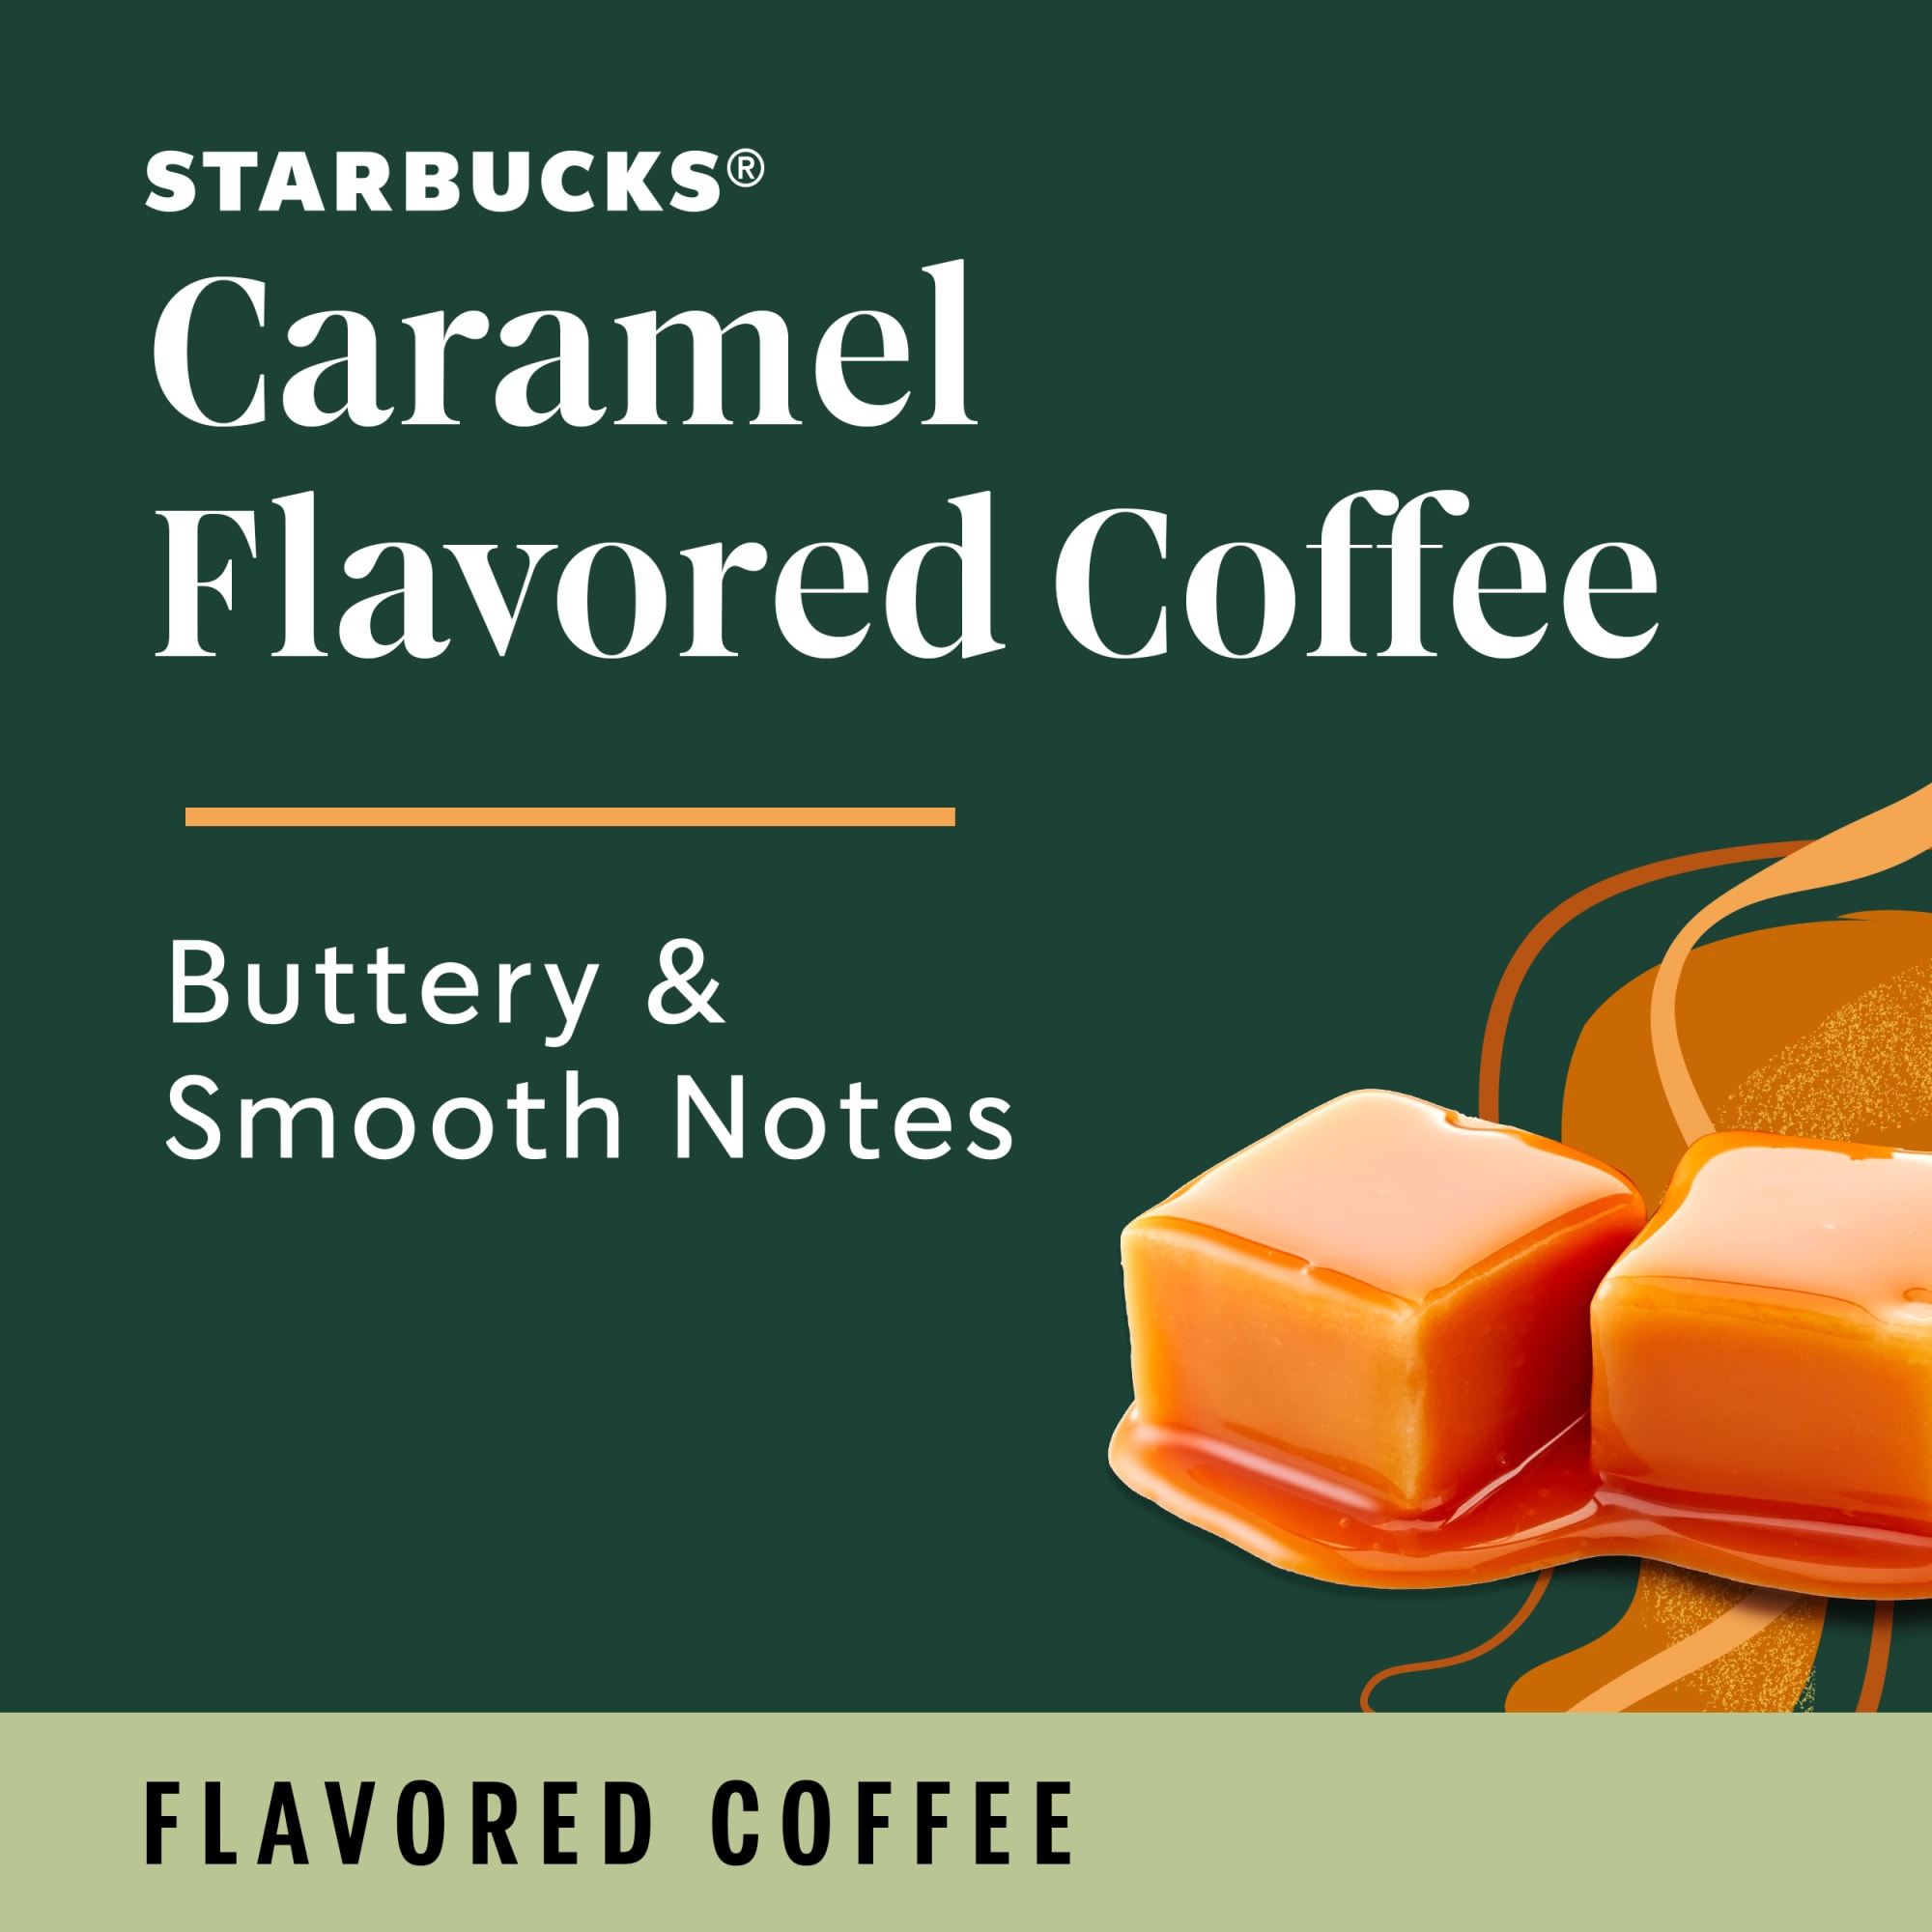 Starbucks Arabica Beans Caramel, Naturally Flavored, Ground Coffee, 11oz - image 4 of 7